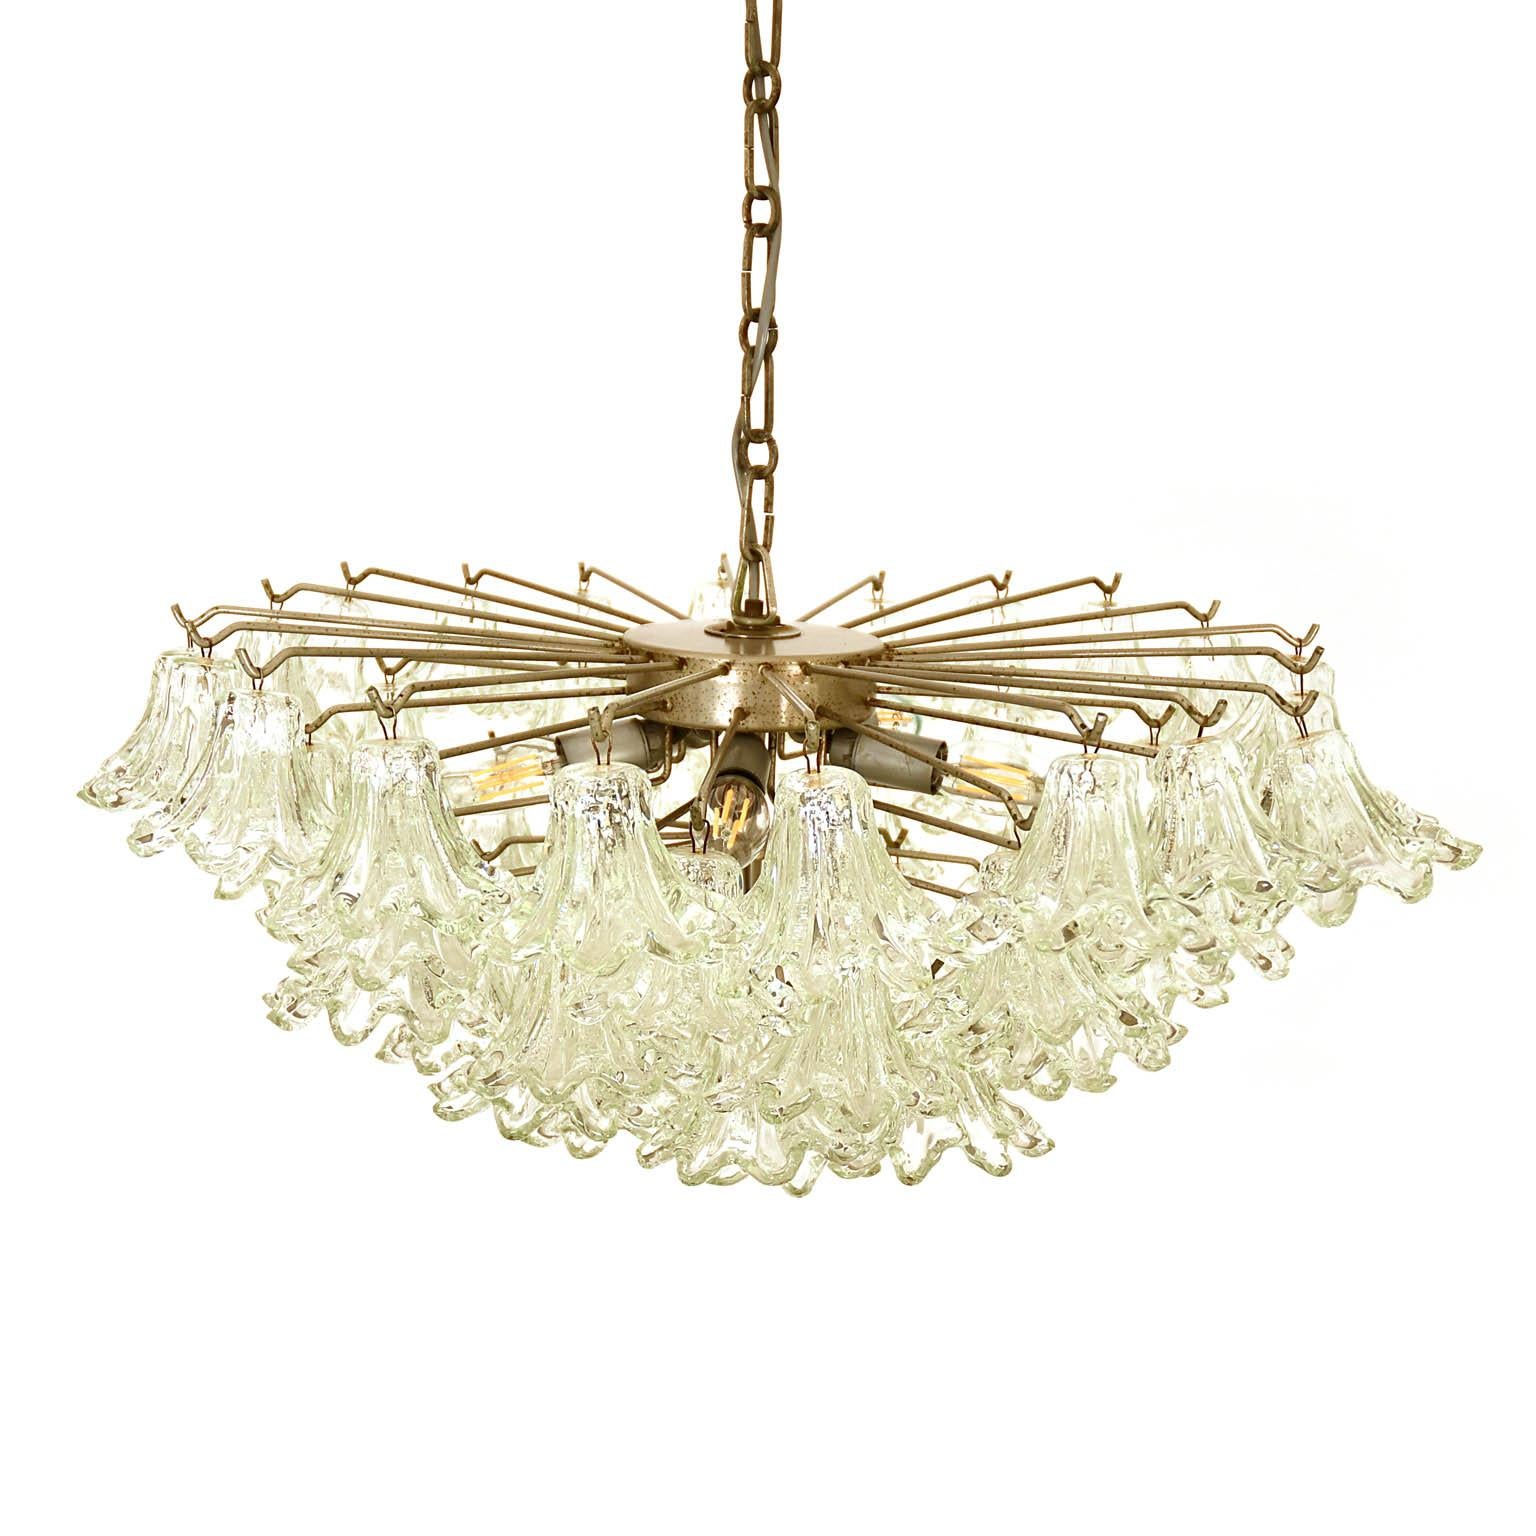 Mid-Century Modern Italian Mid-Century Chandelier with Glass Blossoms, 1955, Murano For Sale